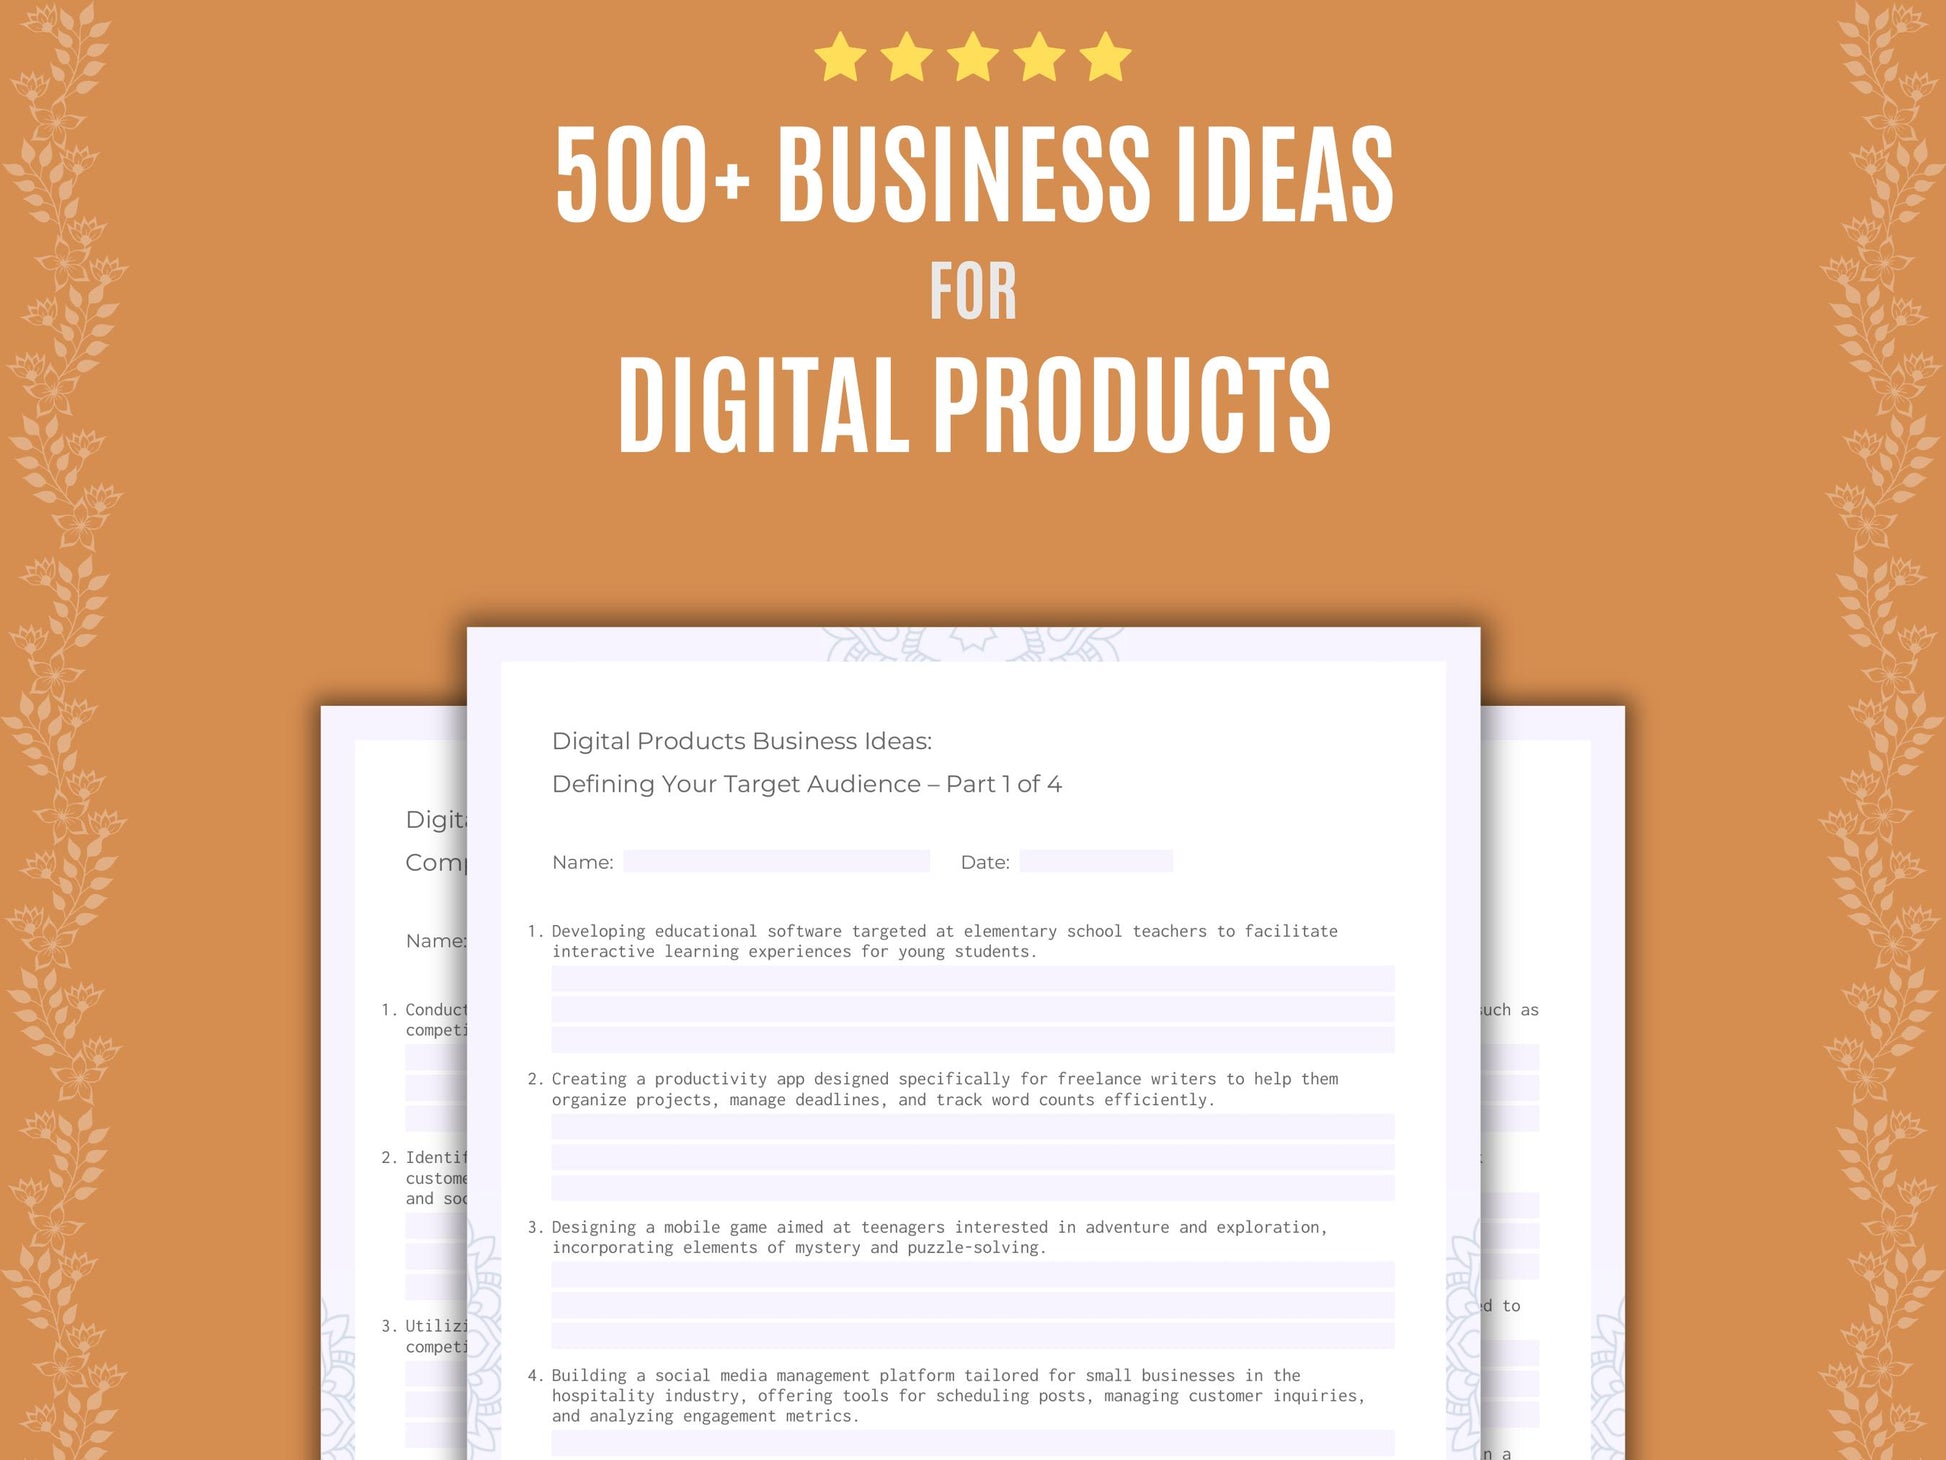 Digital Products Business Ideas